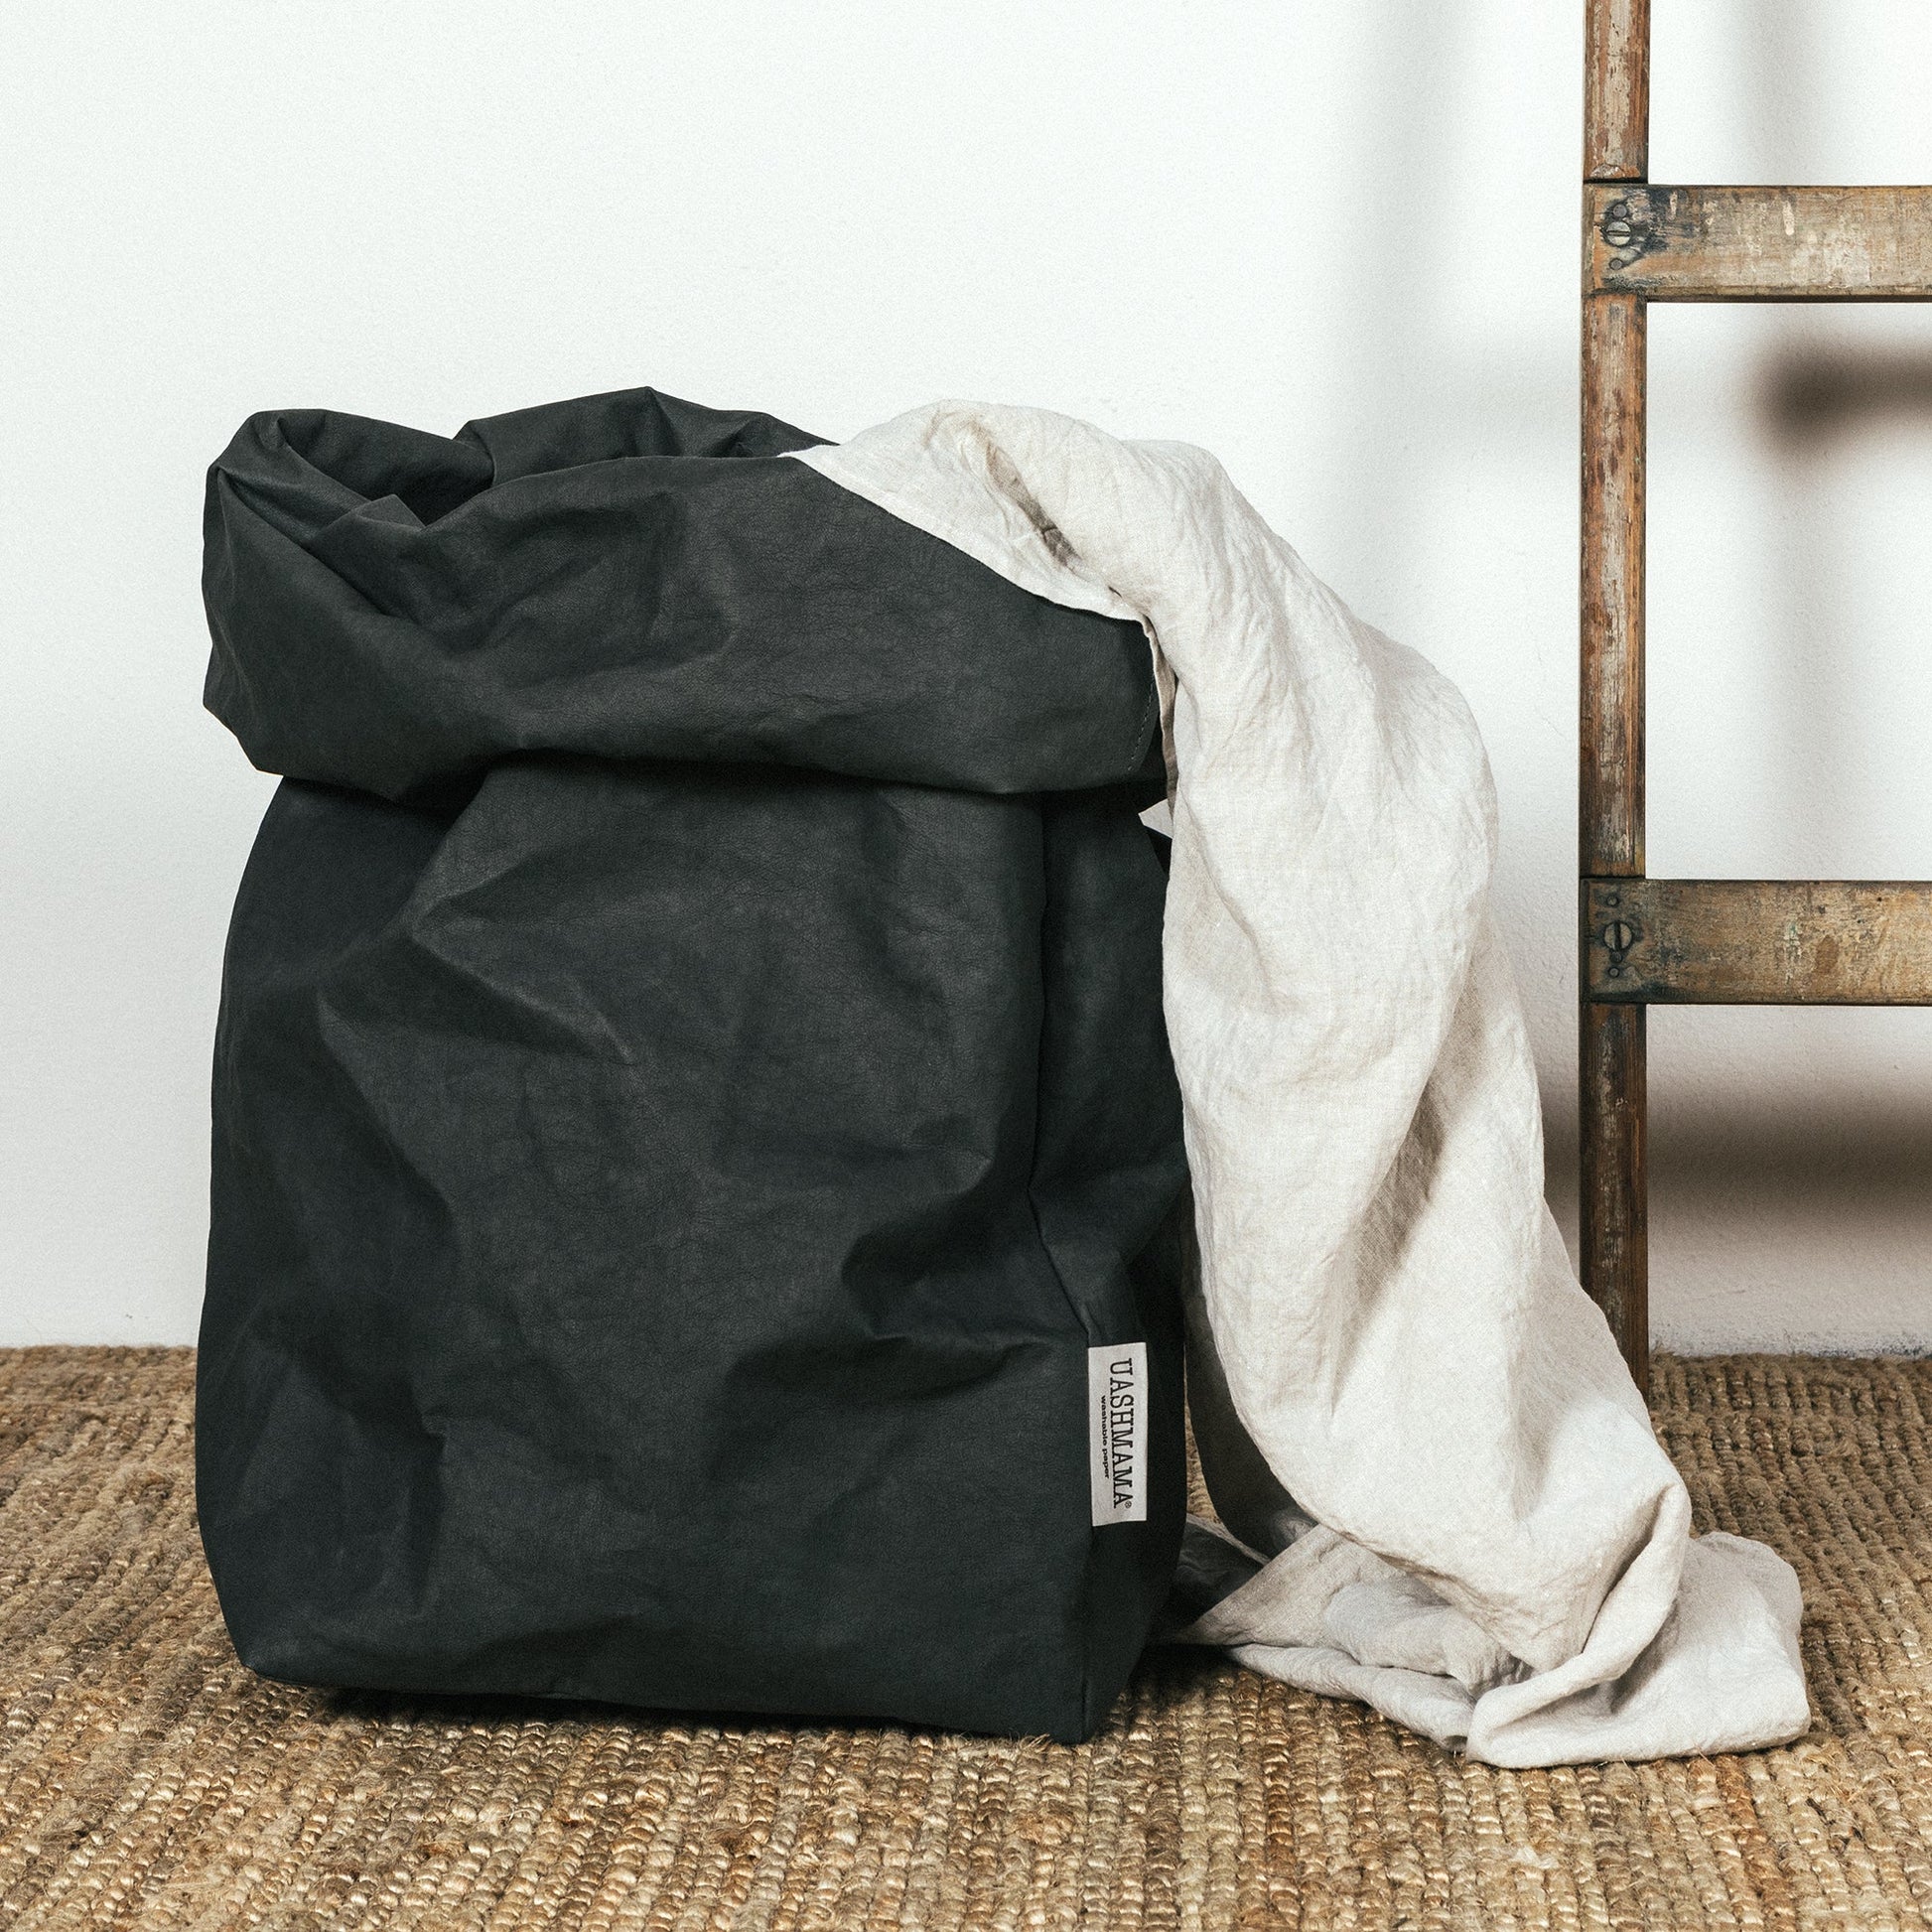 A washable paper bag is shown. The bag is rolled down at the top and features a UASHMAMA logo label on the bottom left corner. The bag pictured is the gigantic size in black. There is a blanket shown draped out of the bag, and next to the blanket and bag is a wooden ladder.